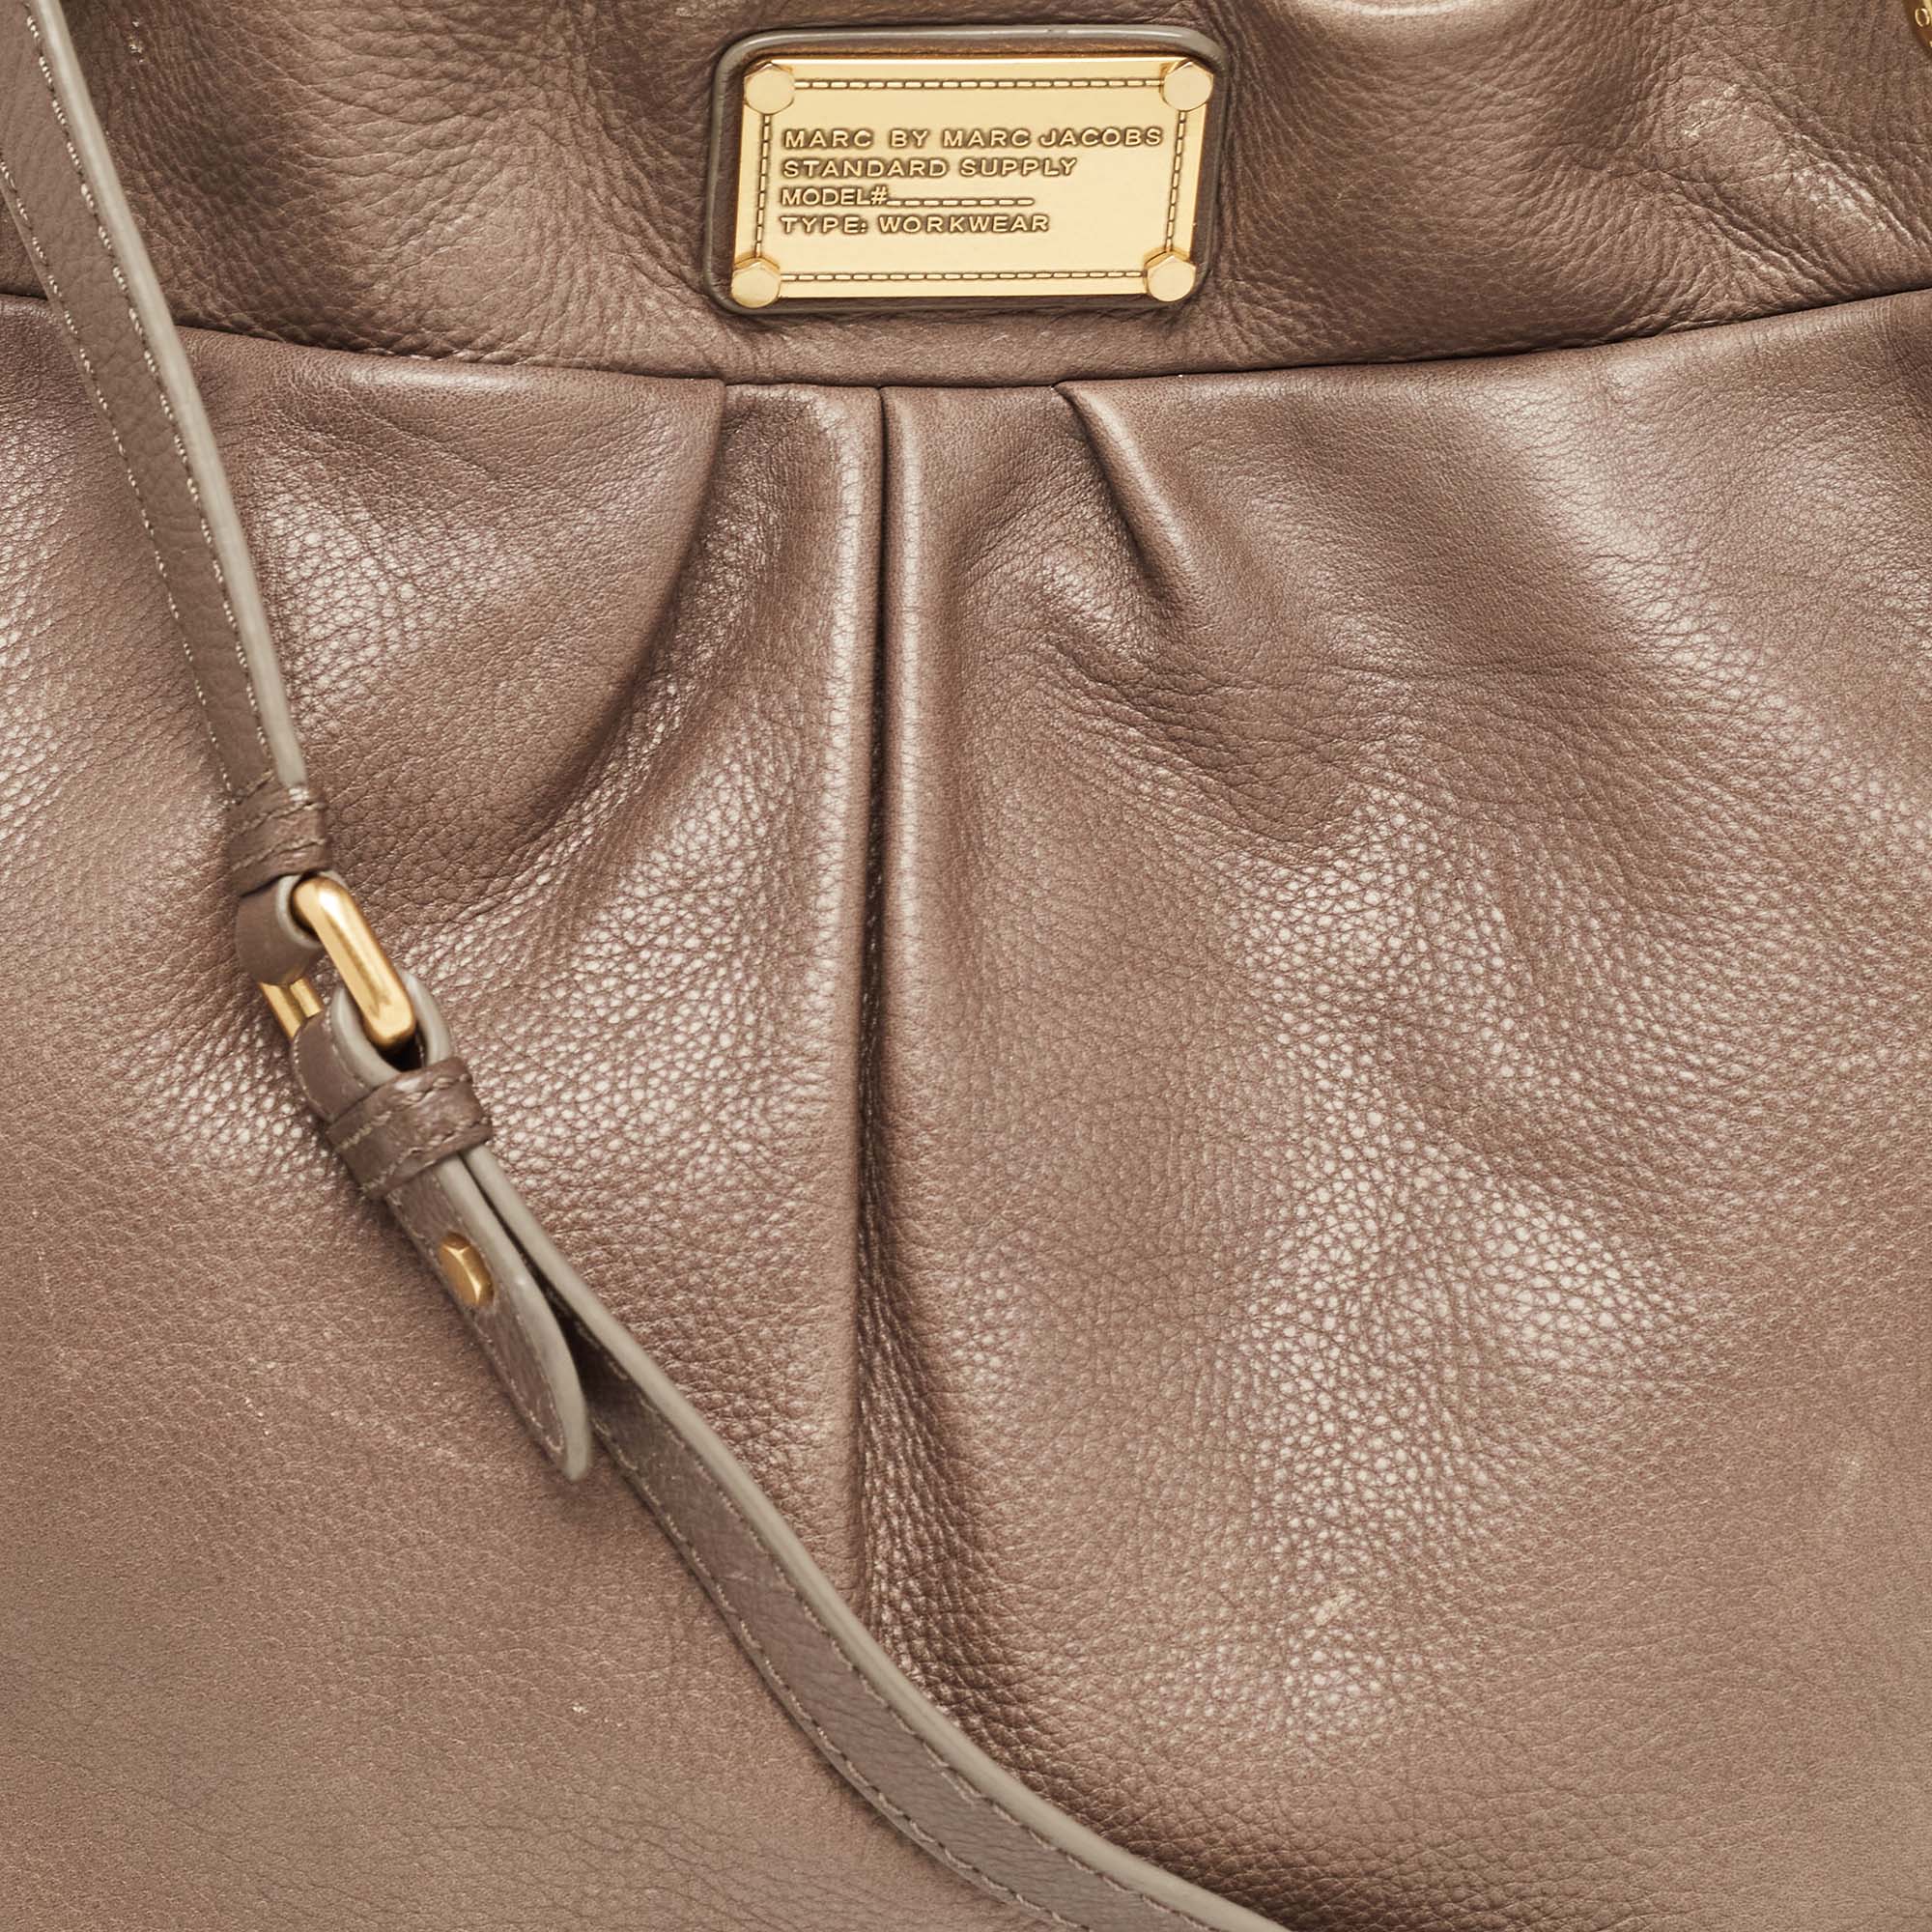 Marc By Marc Jacobs Beige Leather Classic Q Hillier Hobo